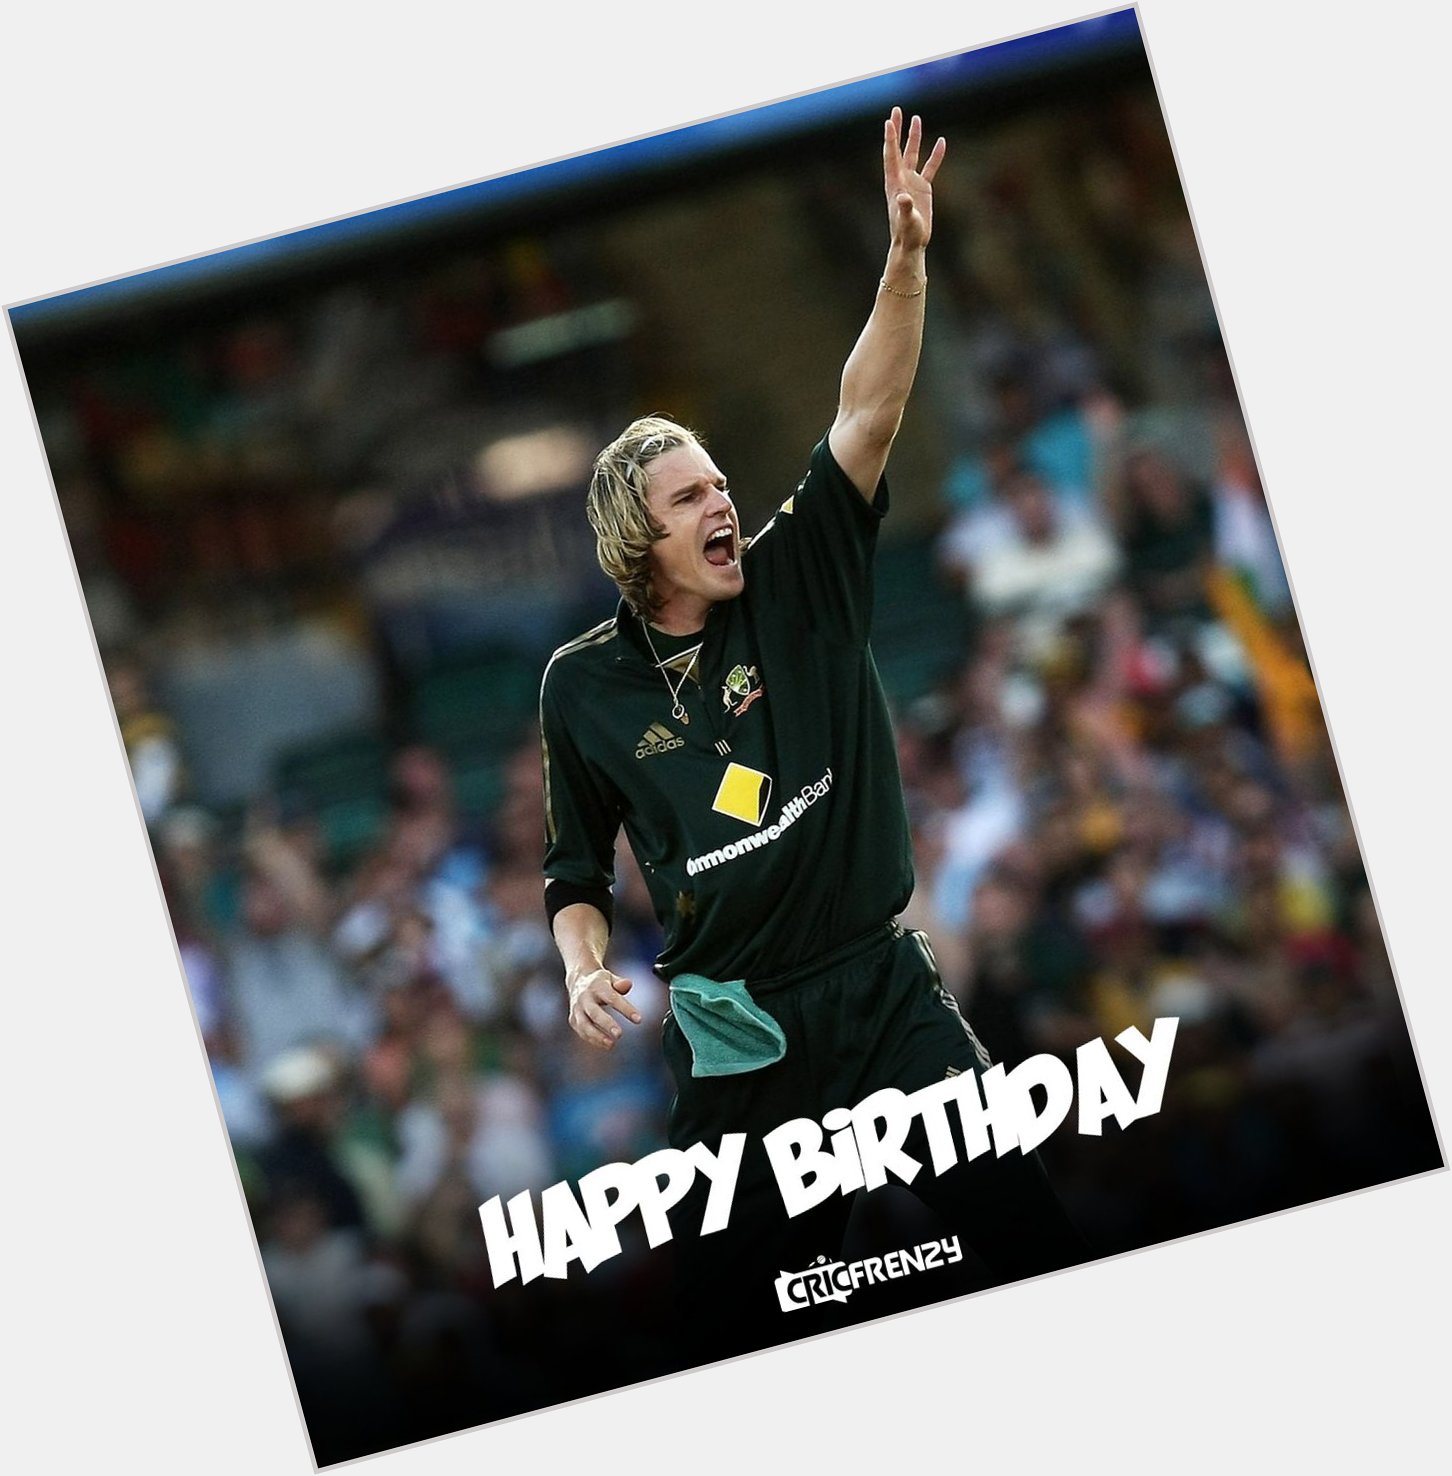 2 times World Cup and a Champions Trophy winner
Happy birthday Nathan Bracken  